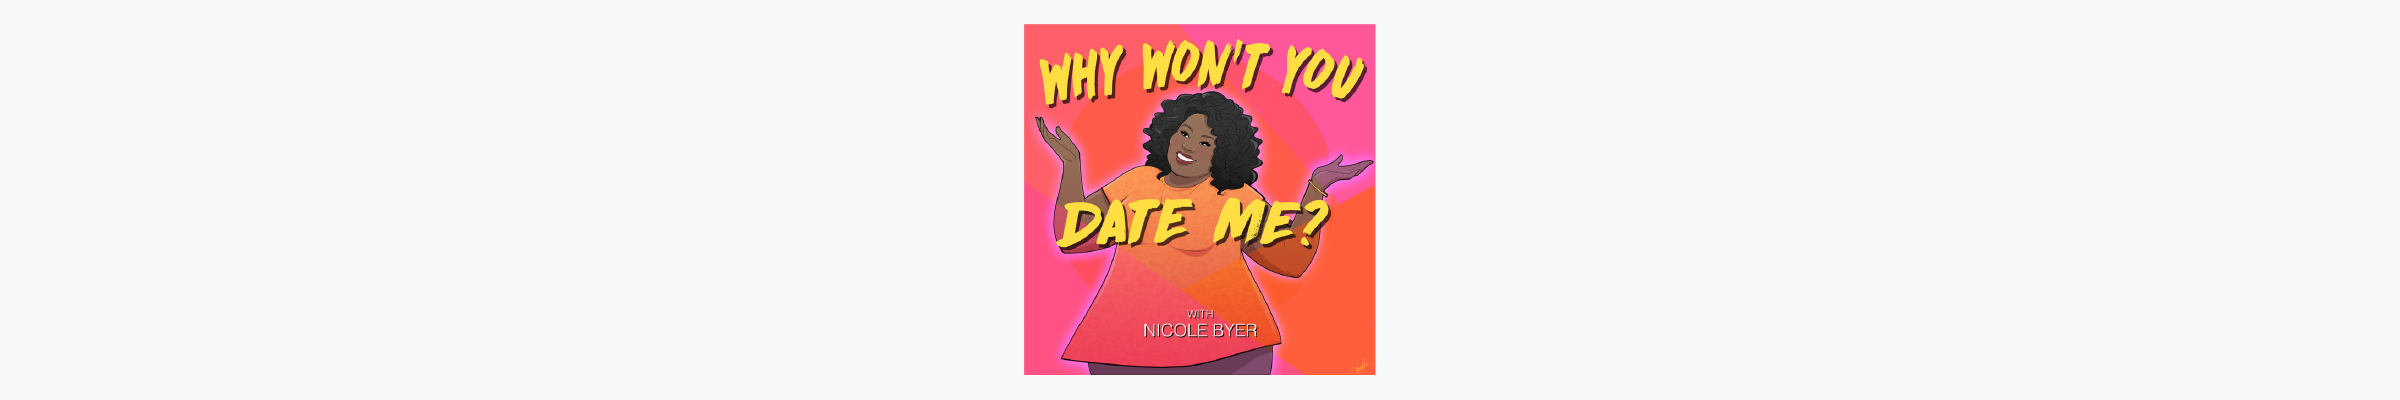 Banner showing Why Won't You Date Me podcast